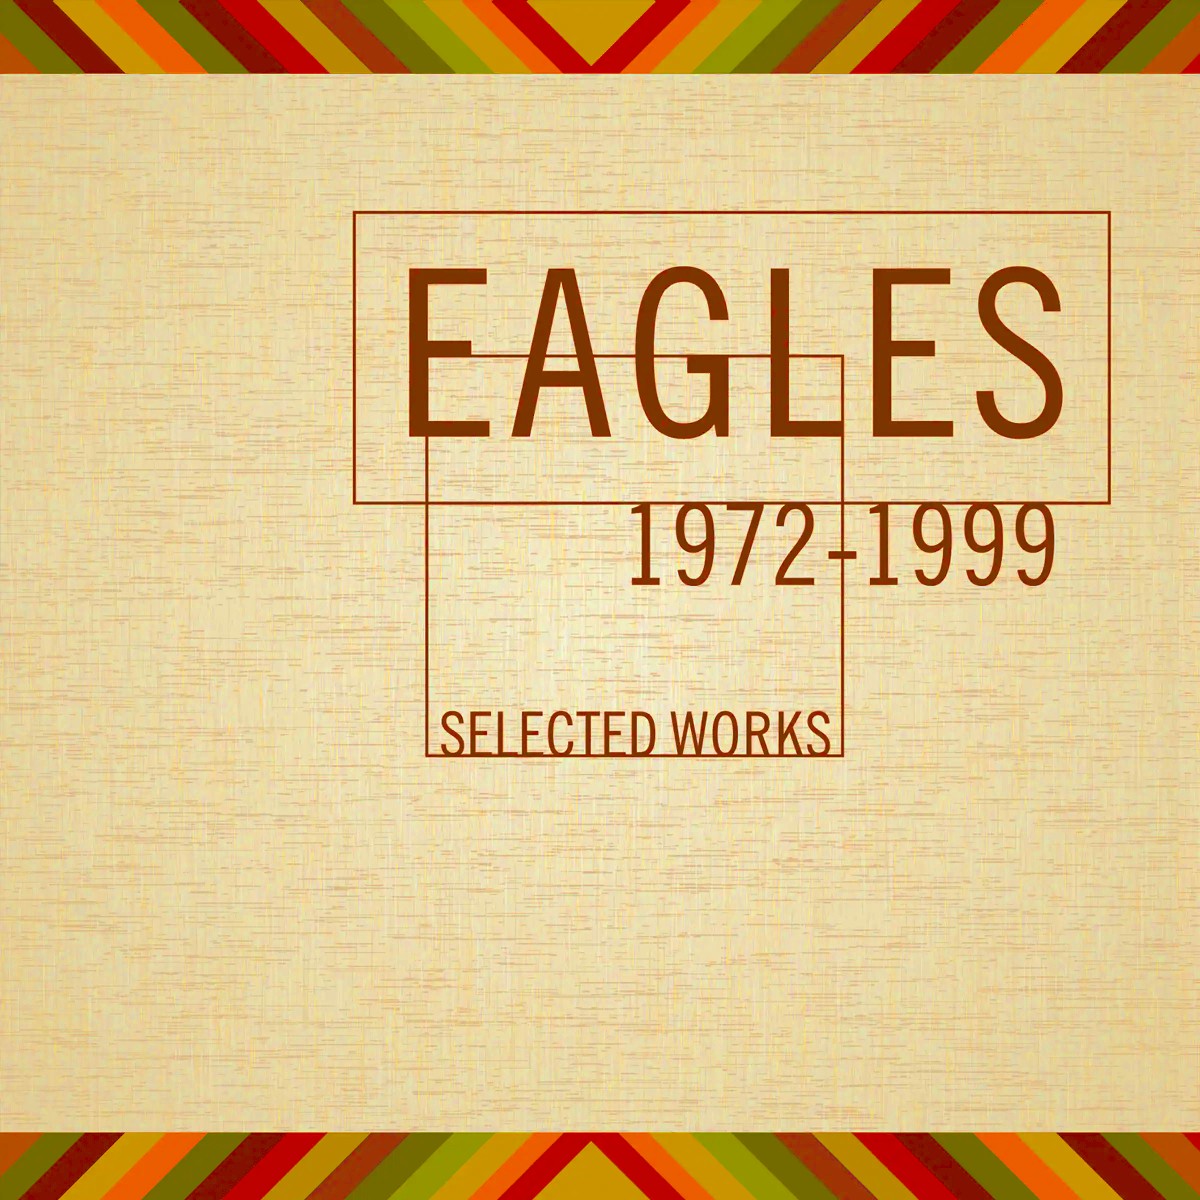 The Eagles, альбом «Selected Works»